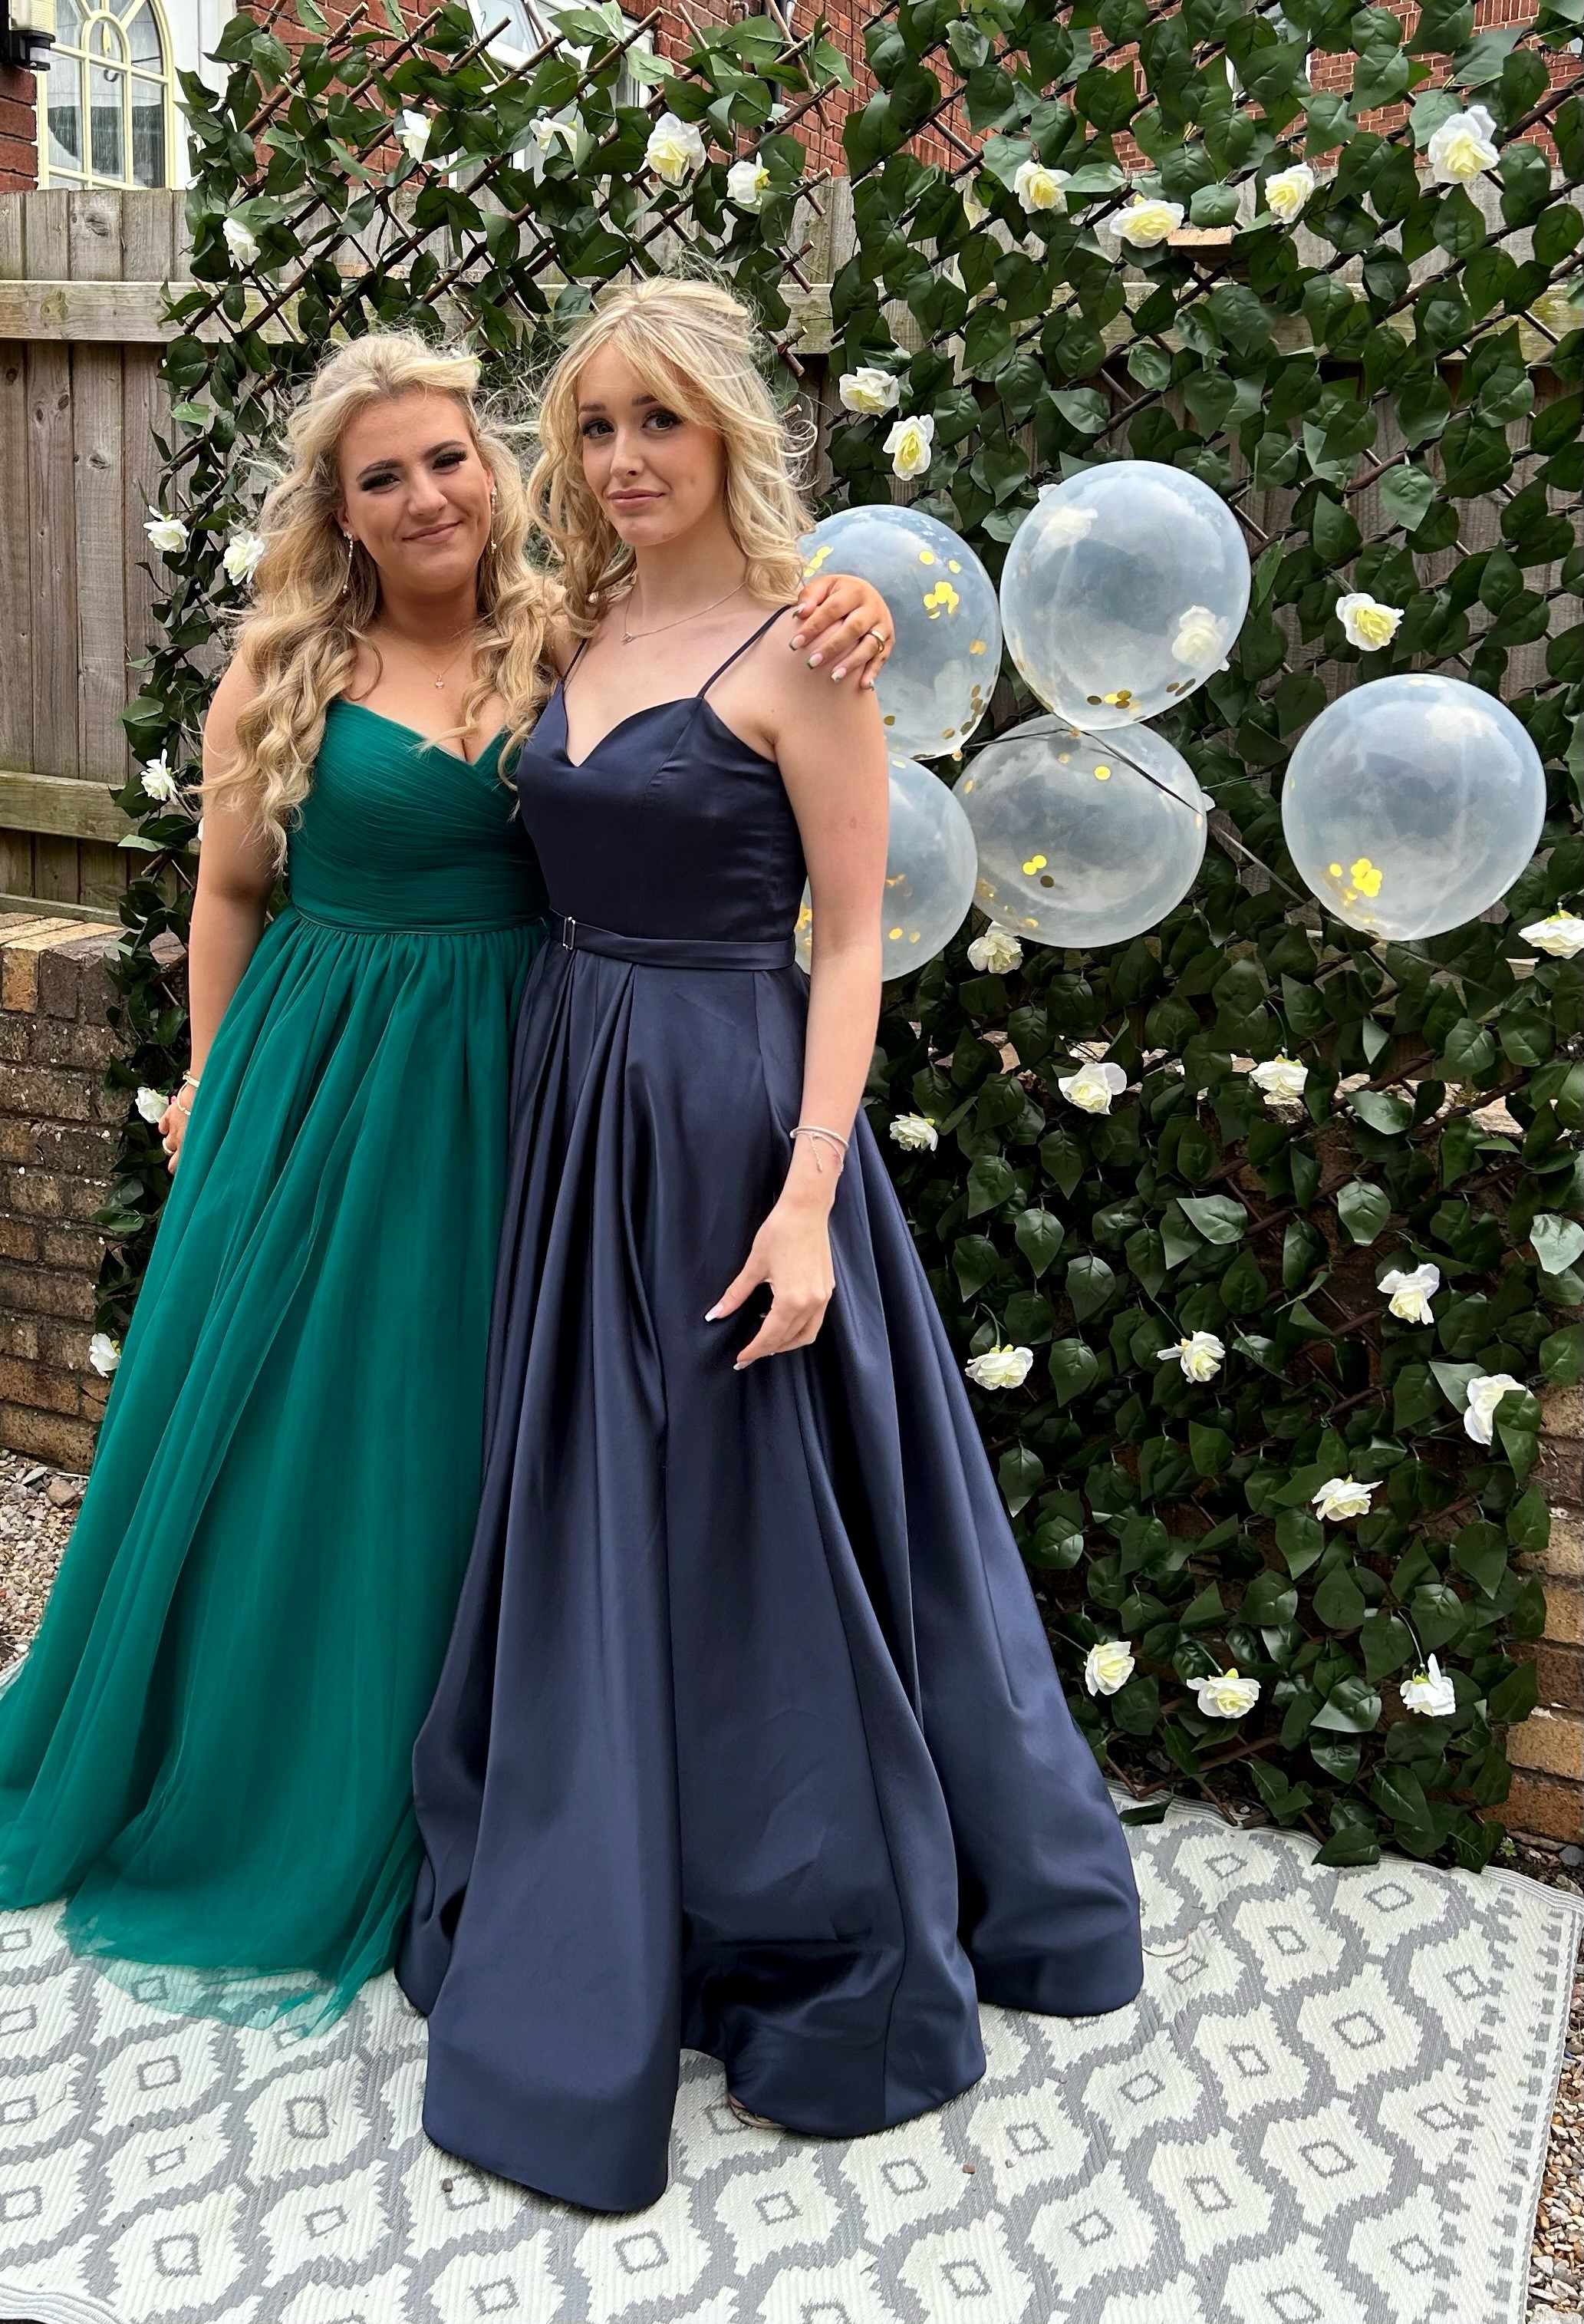 Mary Nightingale: This is my daughter Daisy Nightingale (right) with her best friend Franceska Probert before their Alun School, Mold, Year 11 prom at Chester Racecourse.